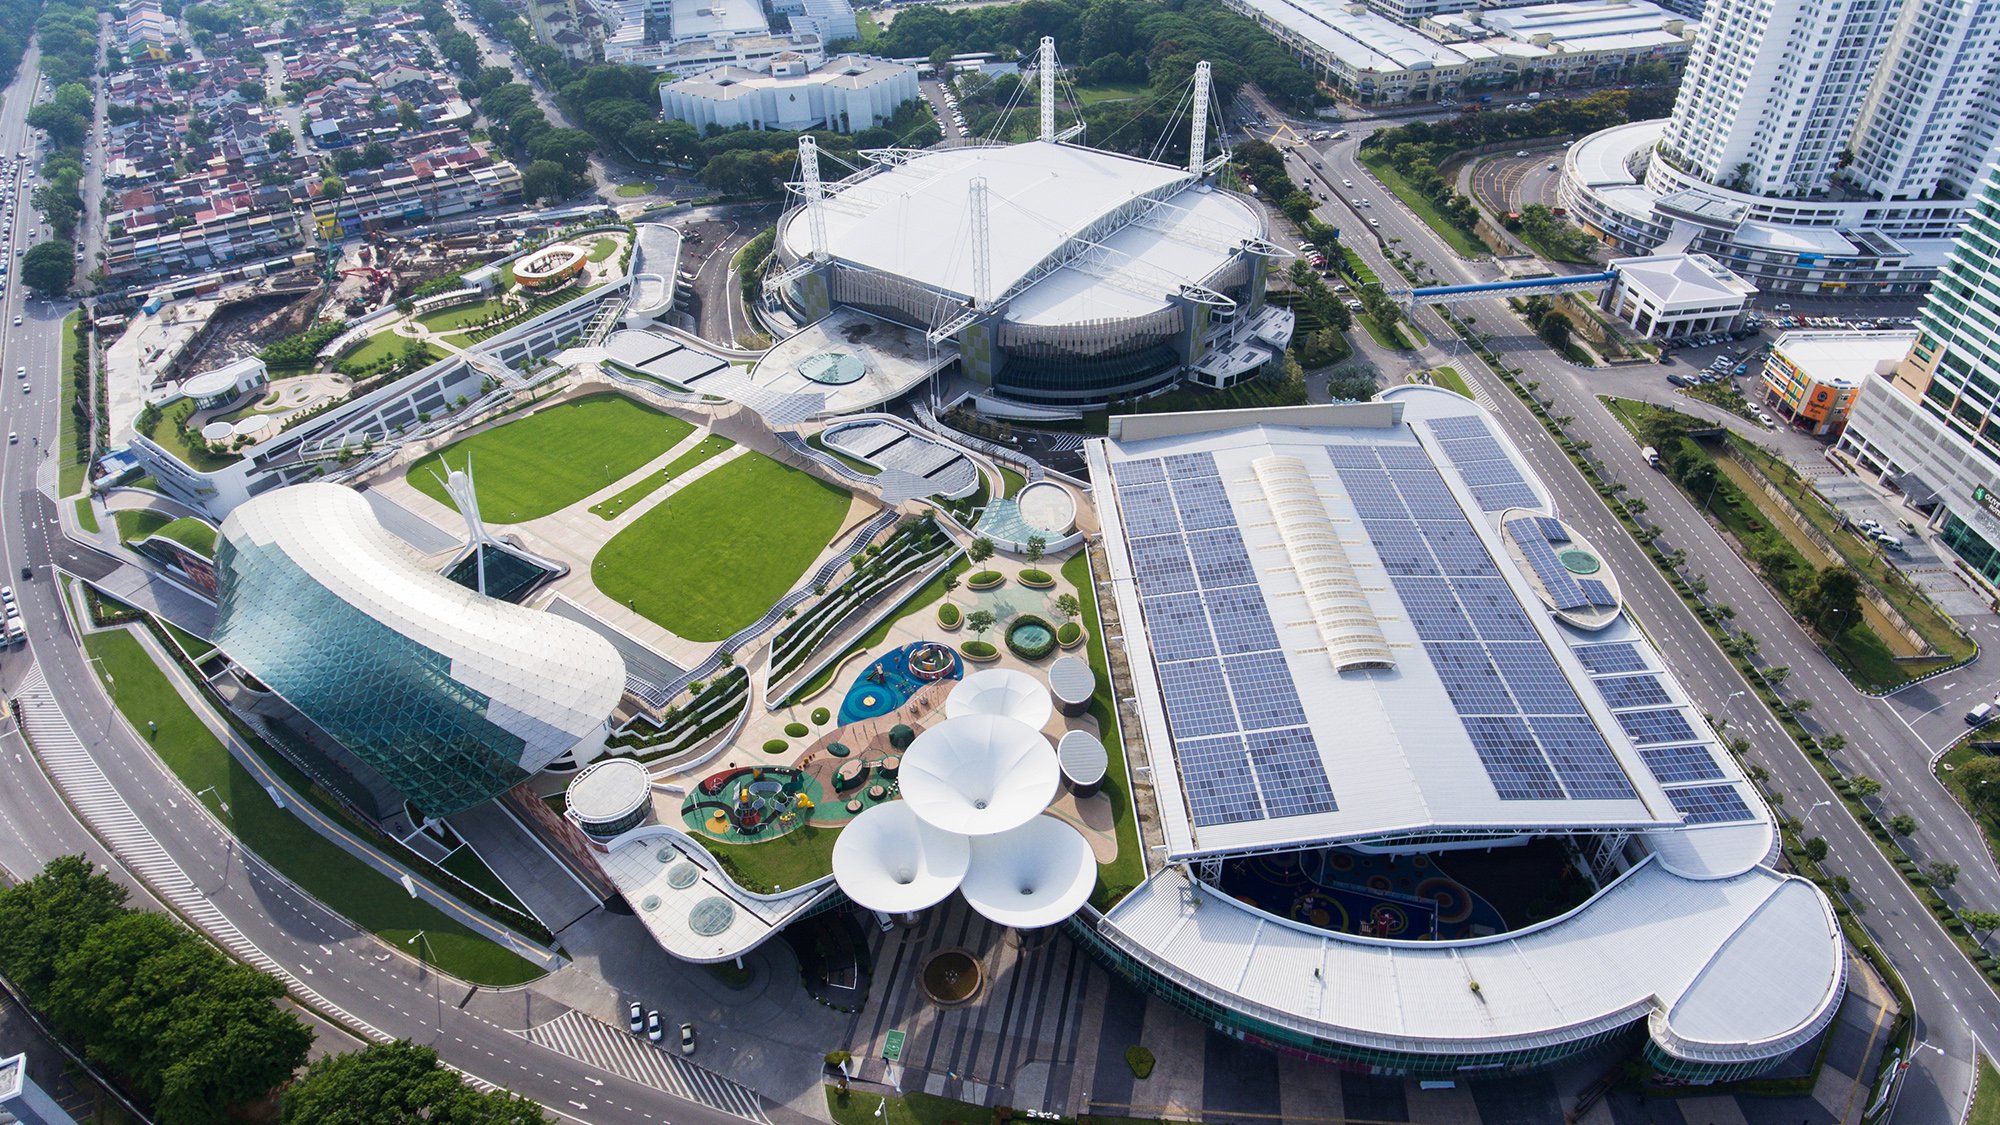 A convention centre with the largest rooftop recreational park